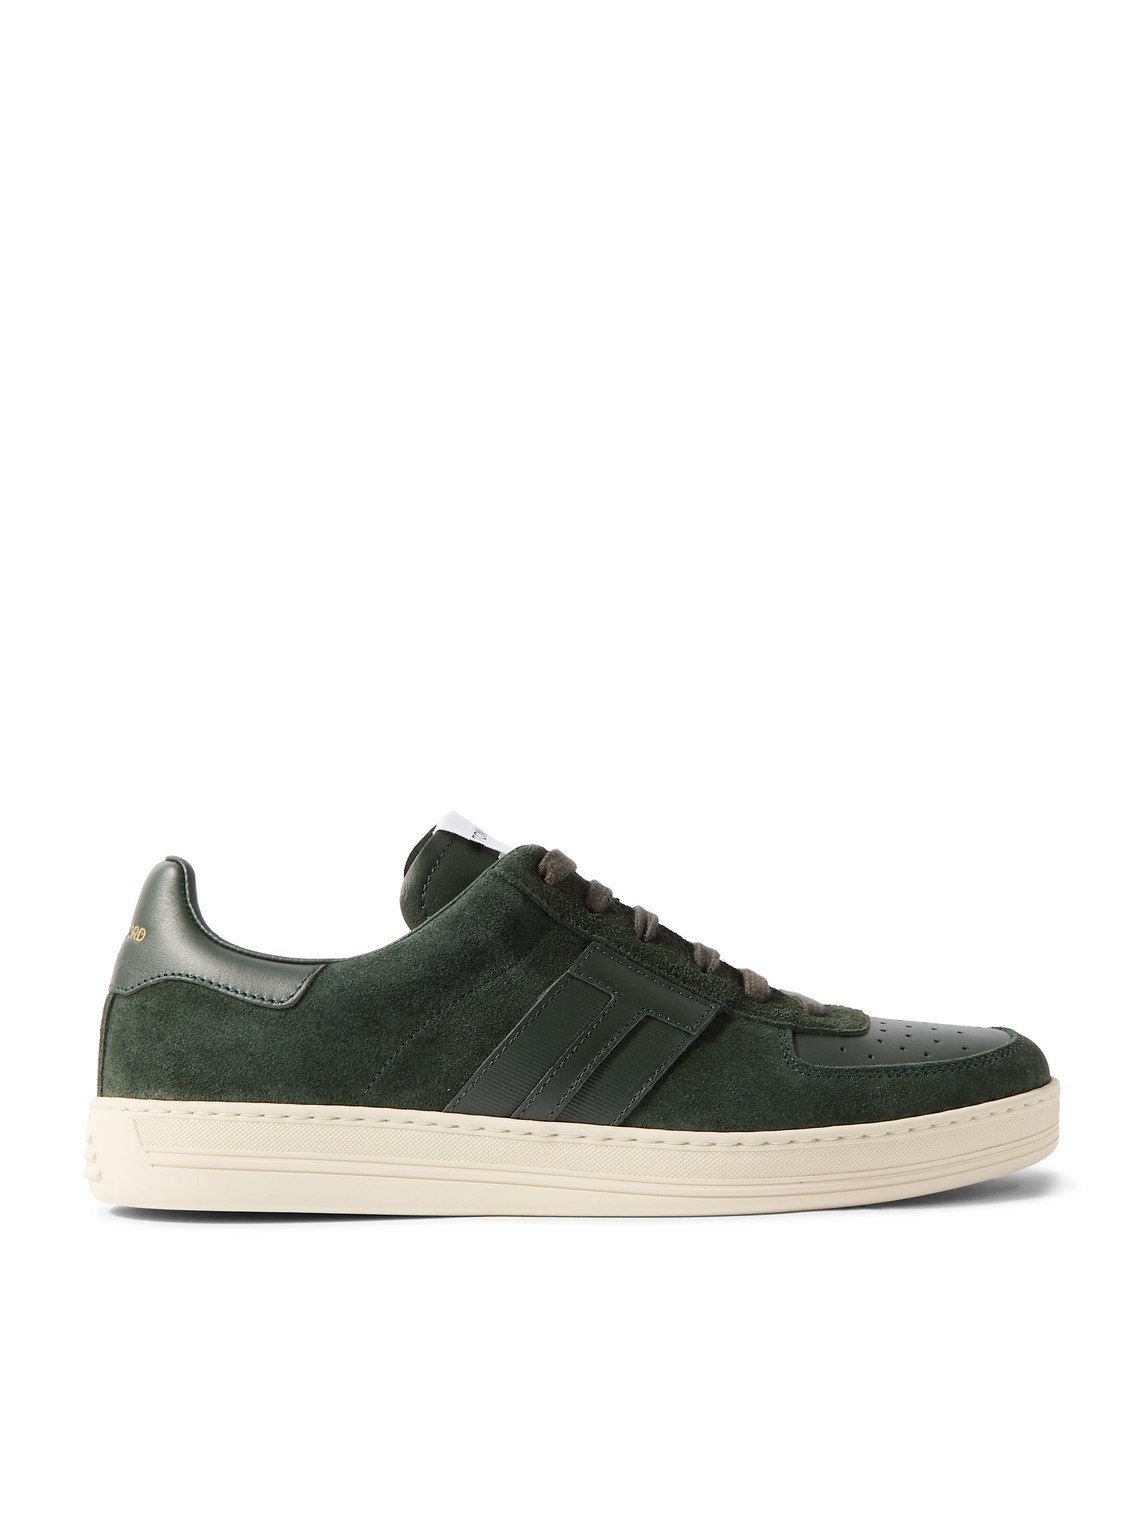 Tom Ford Radcliffe Suede And Leather Sneakers In Green